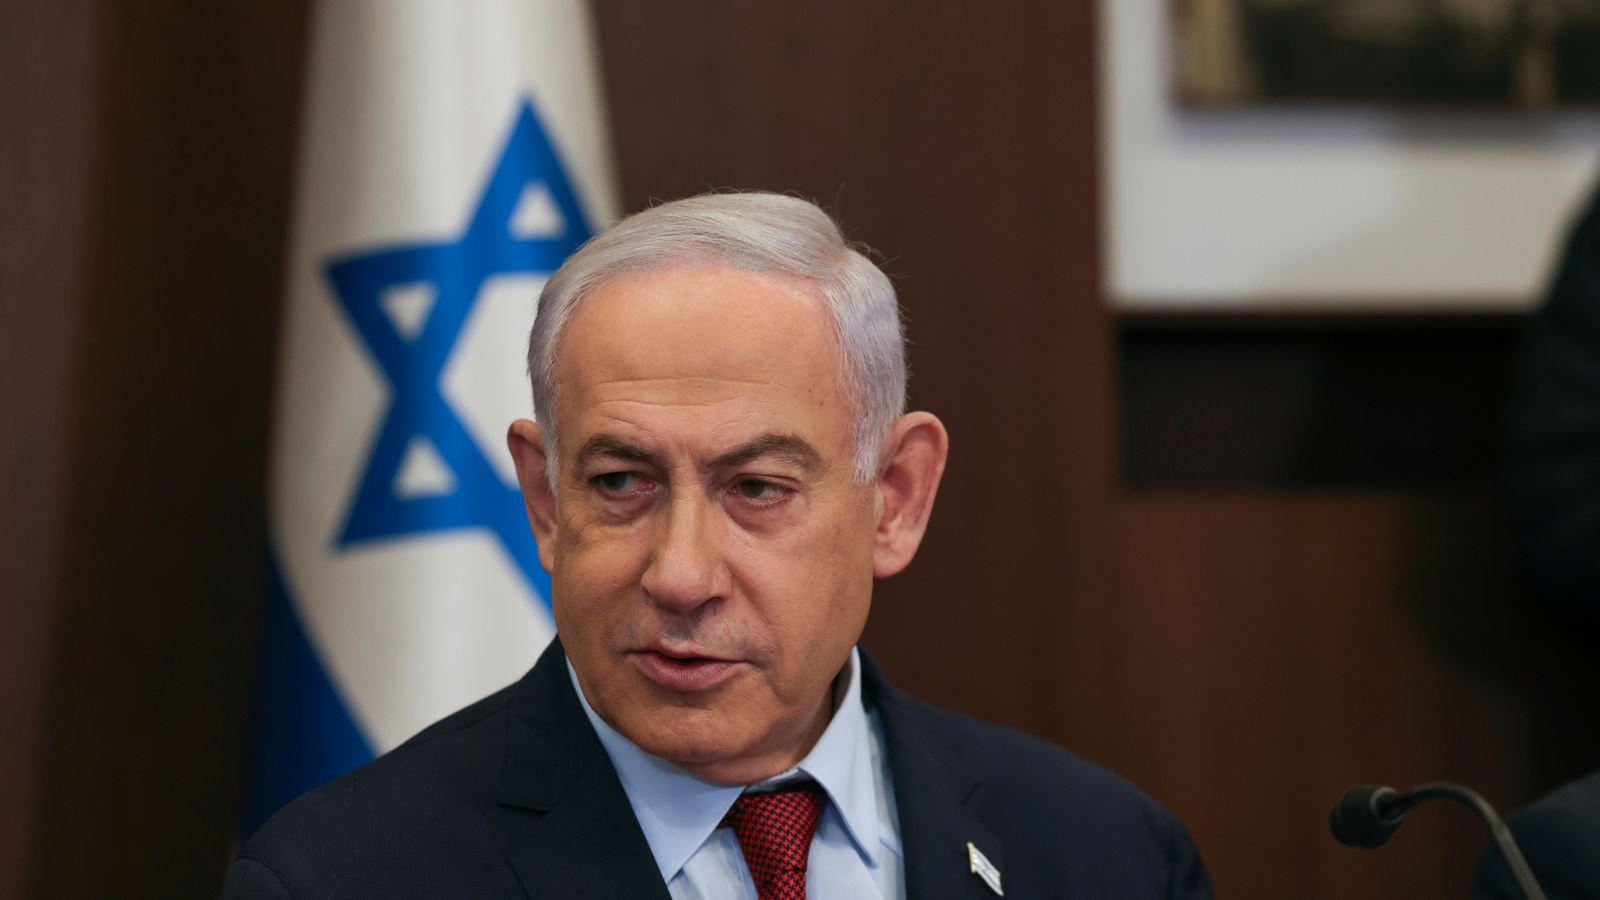 Benjamin Netanyahu is openly defying the US - and they want him gone